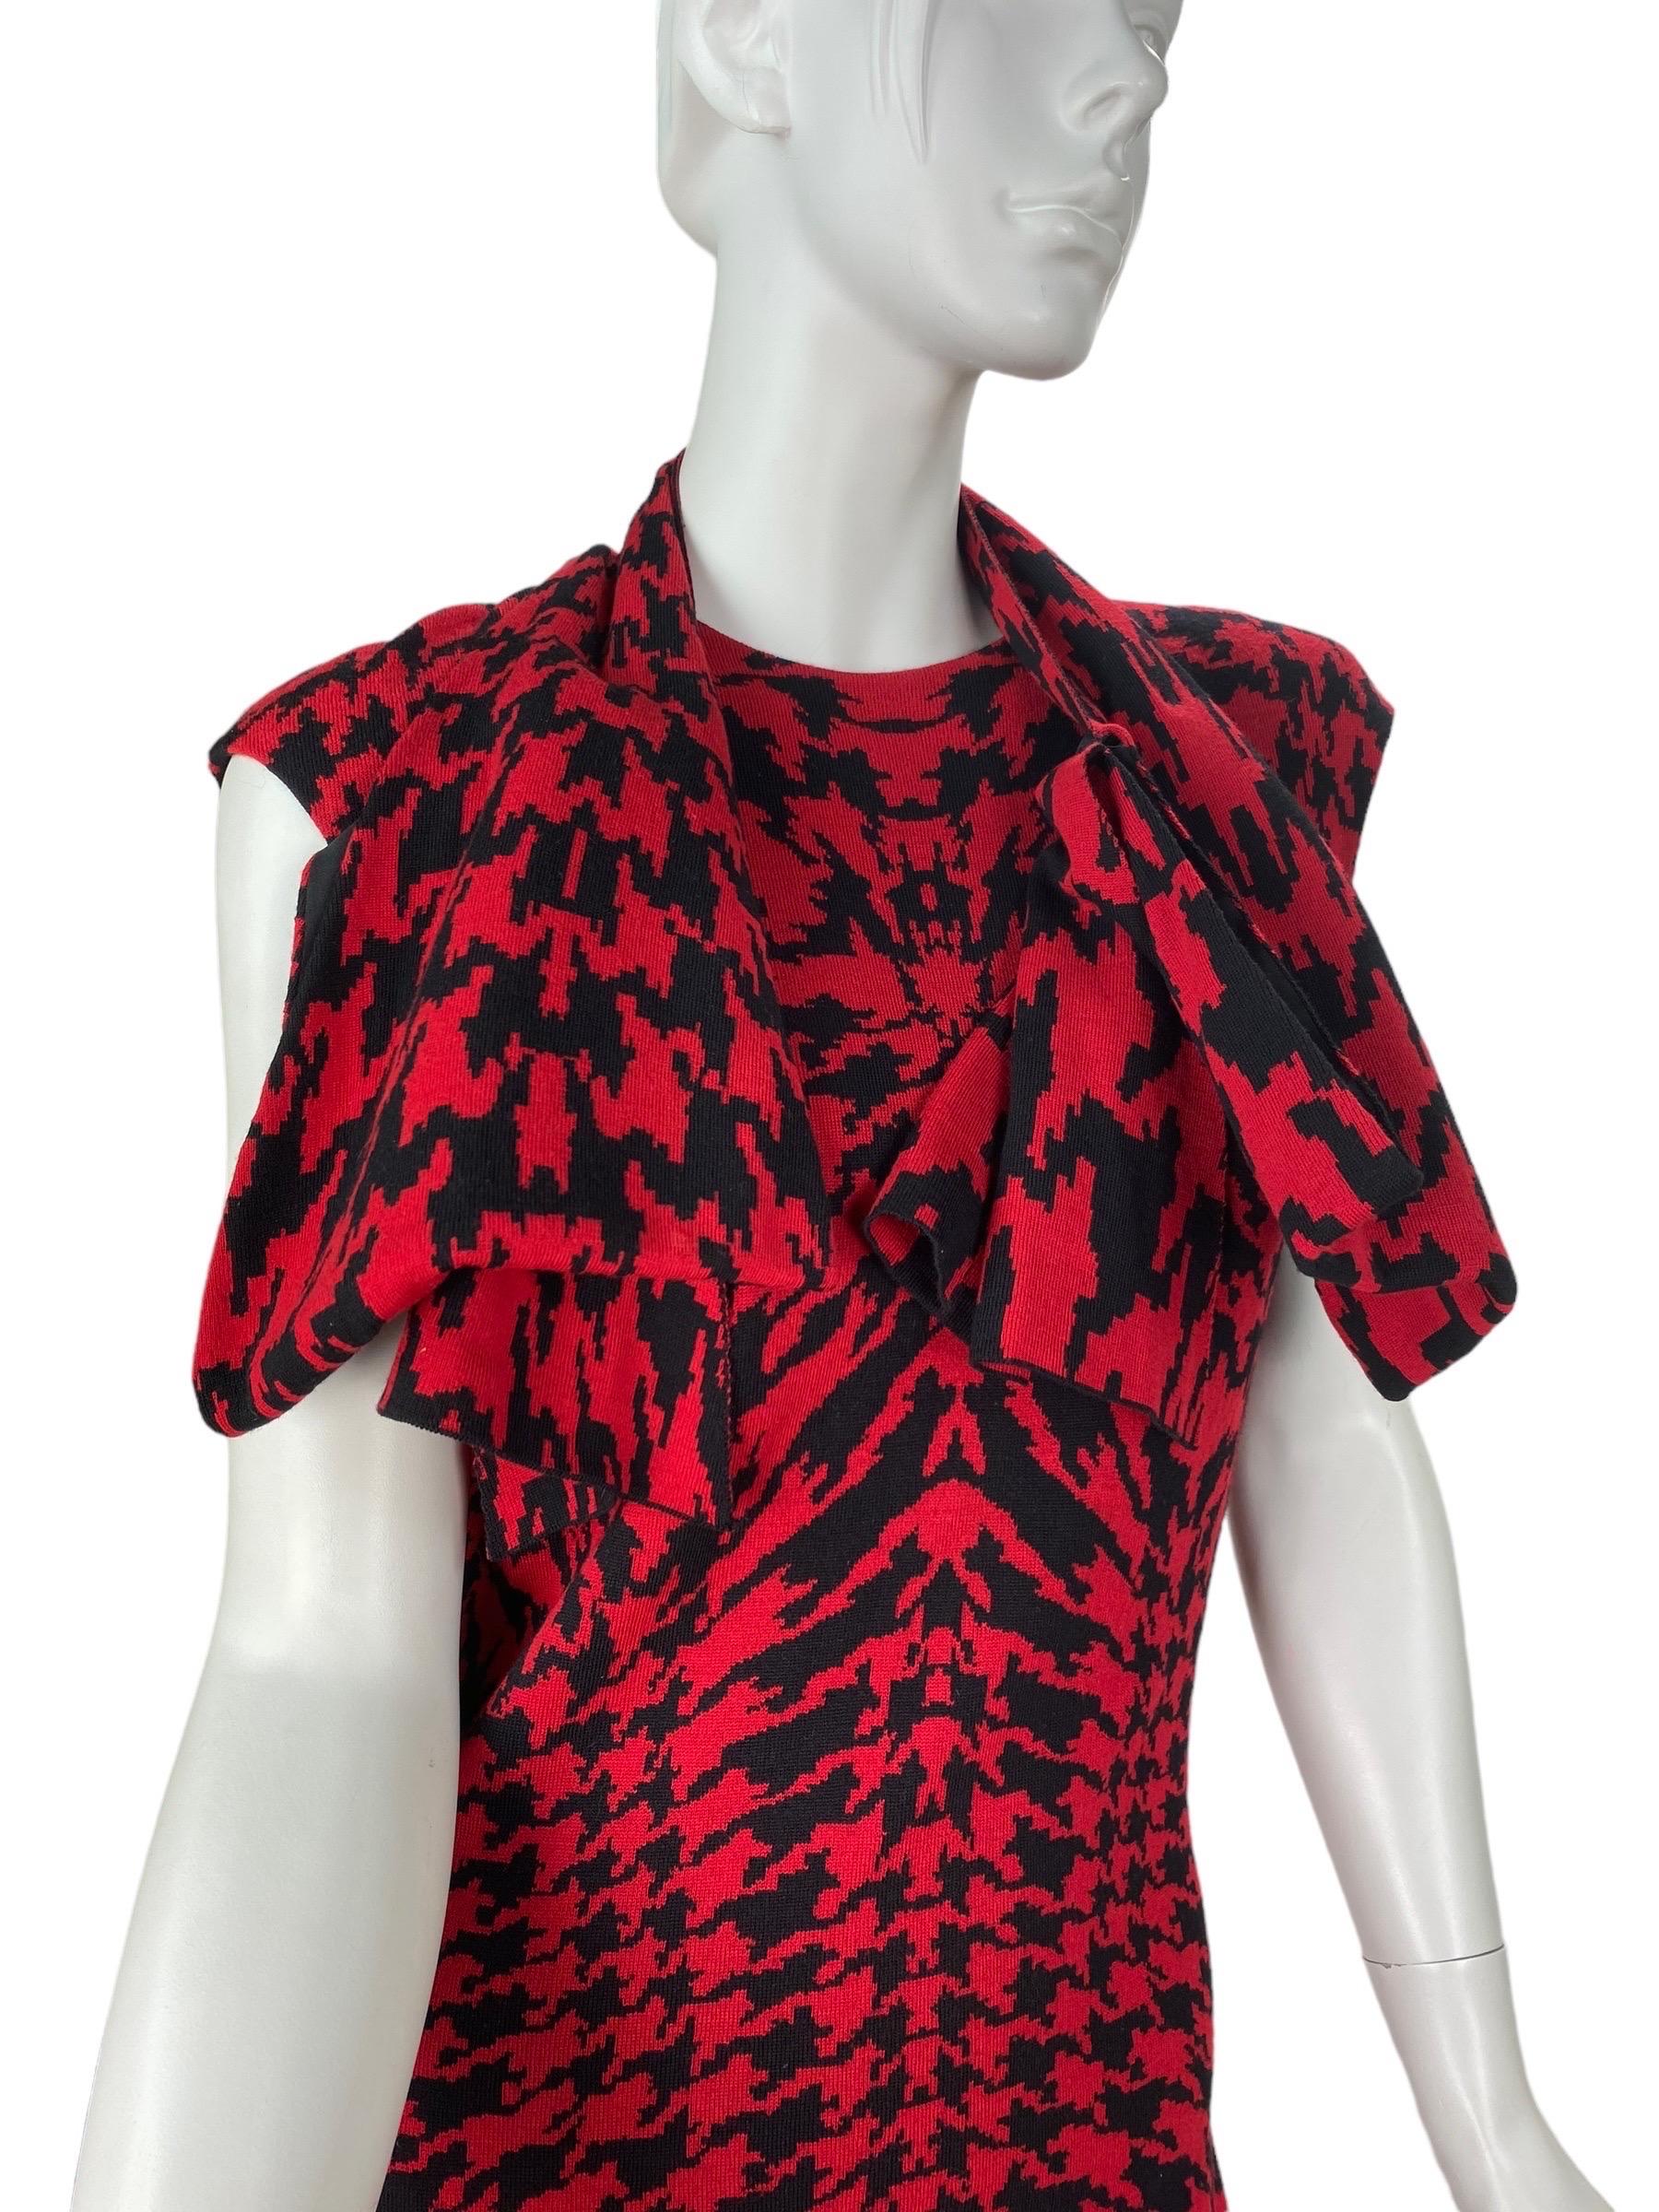 F/W 2009 Iconic Alexander Mcqueen houndstooth print knit dress  For Sale 4